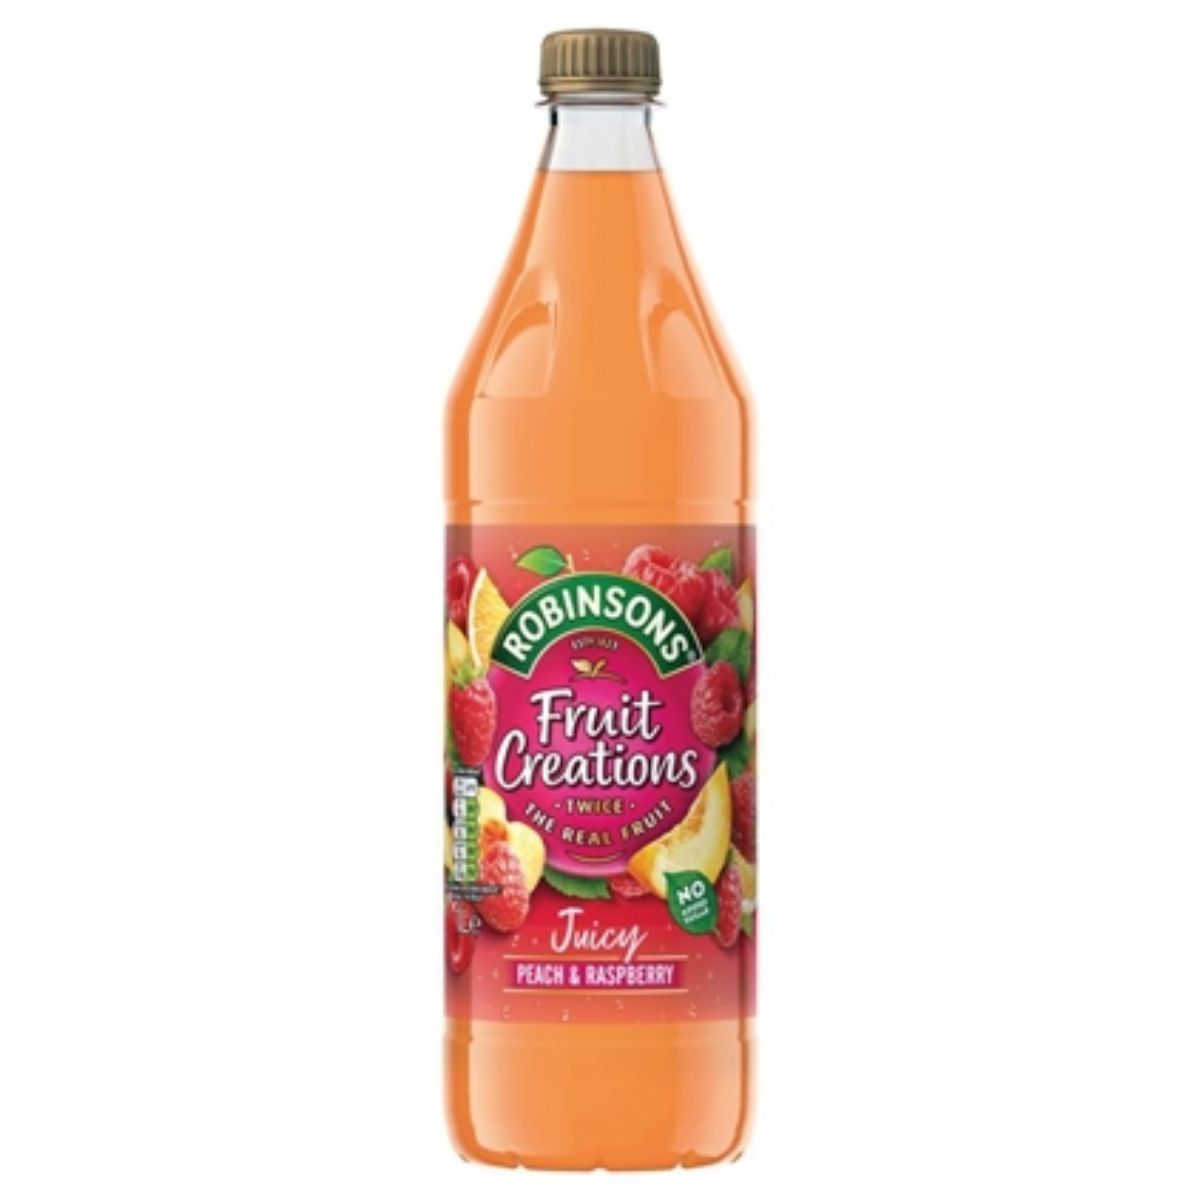 A bottle of Robinsons - Fruit Creations Peach & Raspberry Squash - 1L on a white background.